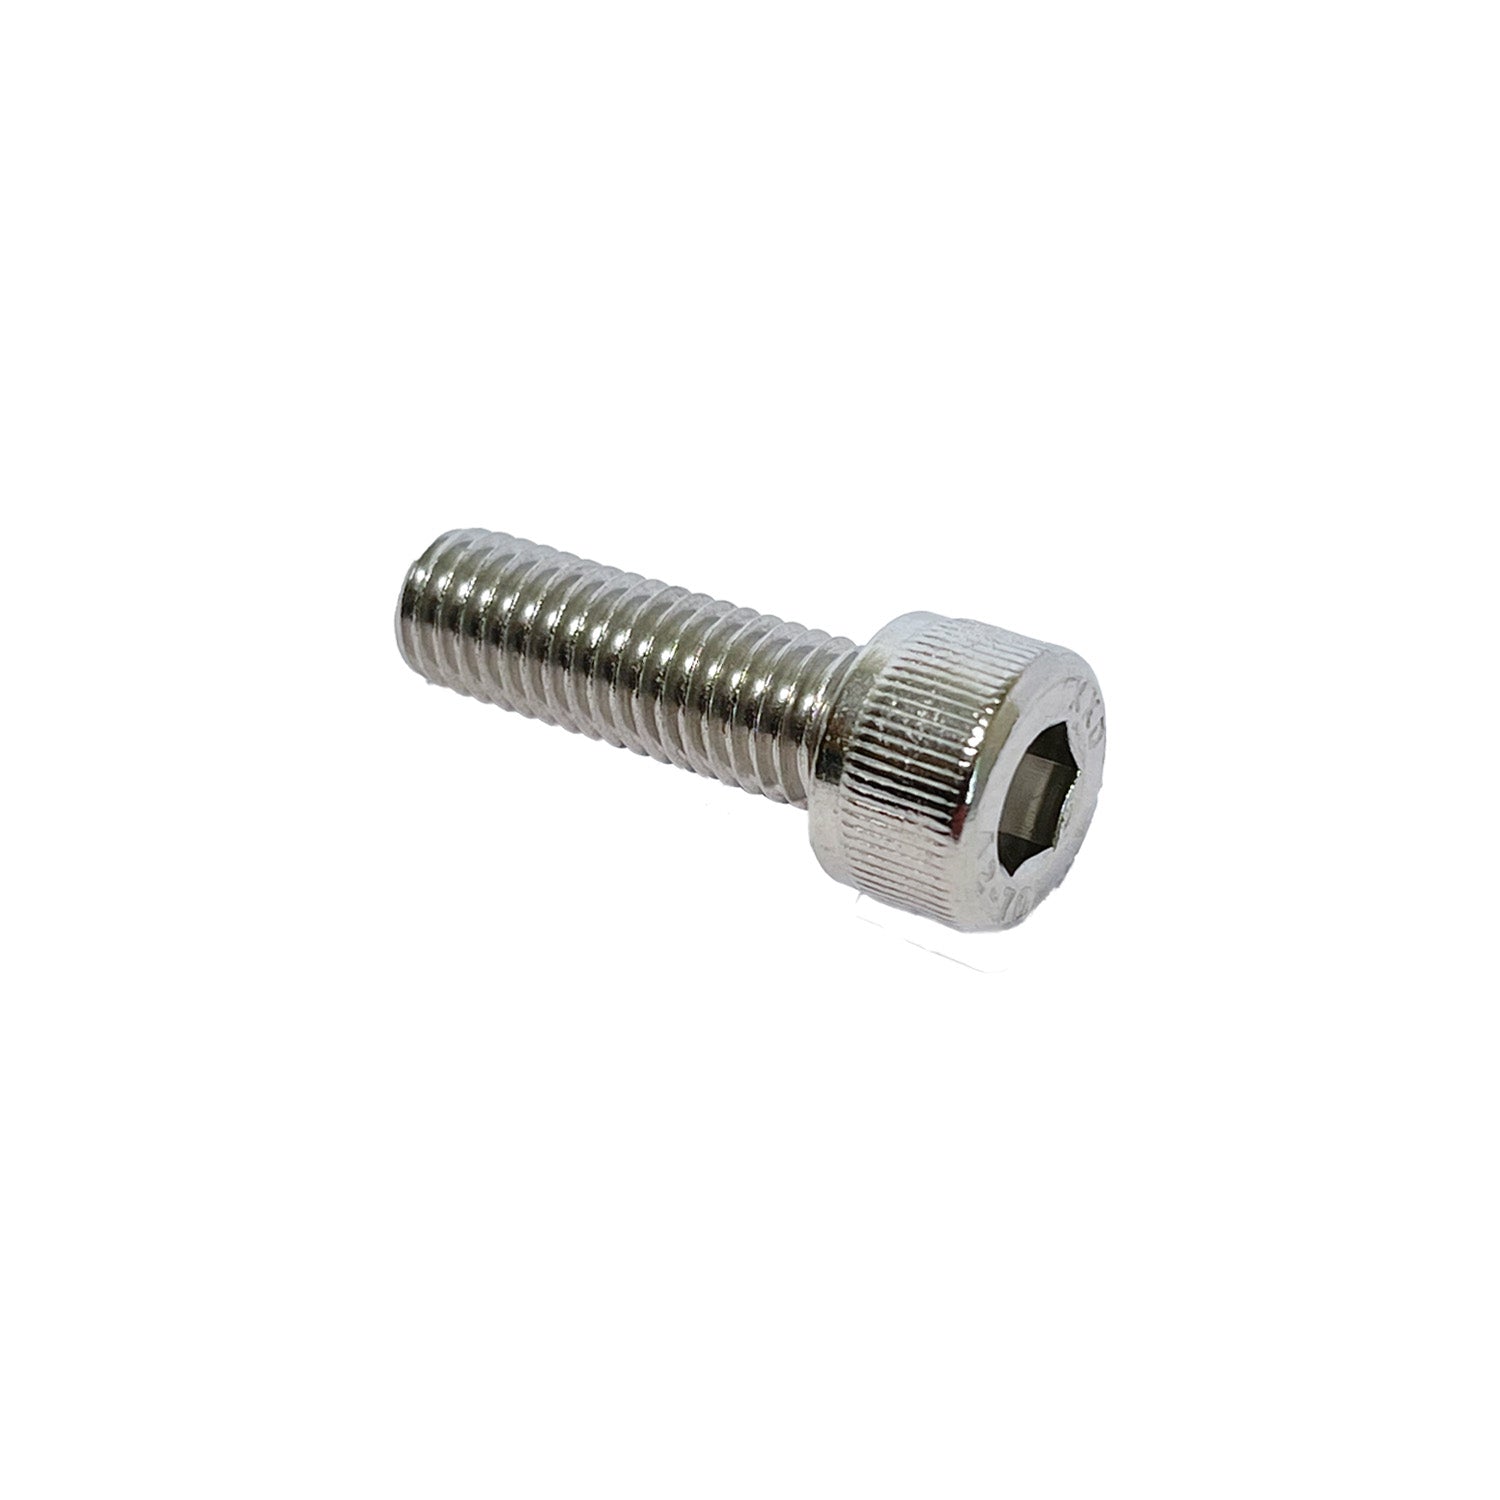 6mm x 25.4mm hex head bolt for pipe clamps SS